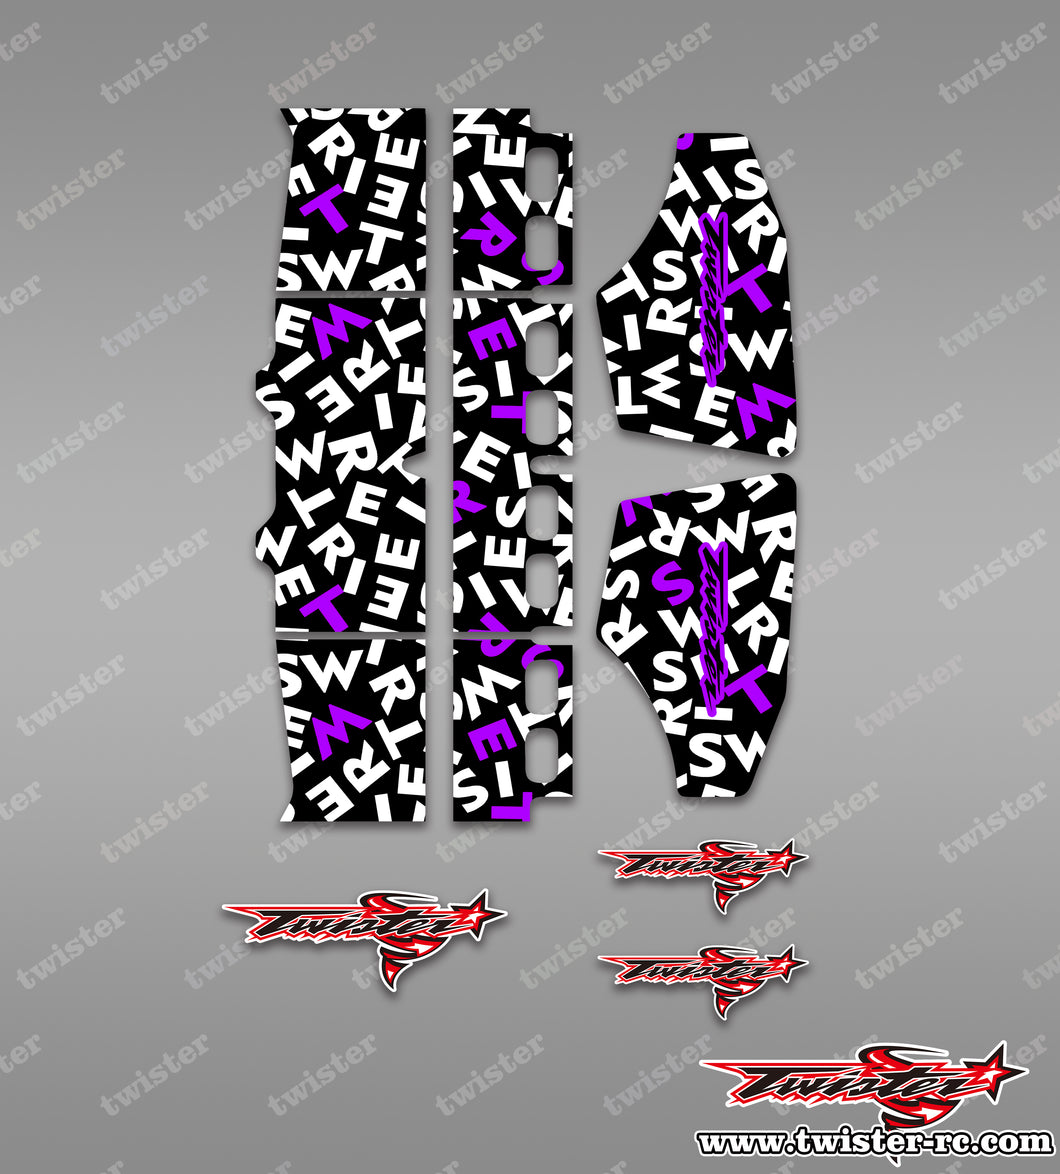 TR-TW-MT1 T-WORK'S Airflow Buggy Wing Optical White Pattern Wrap ( Type MT1 )4 Colors